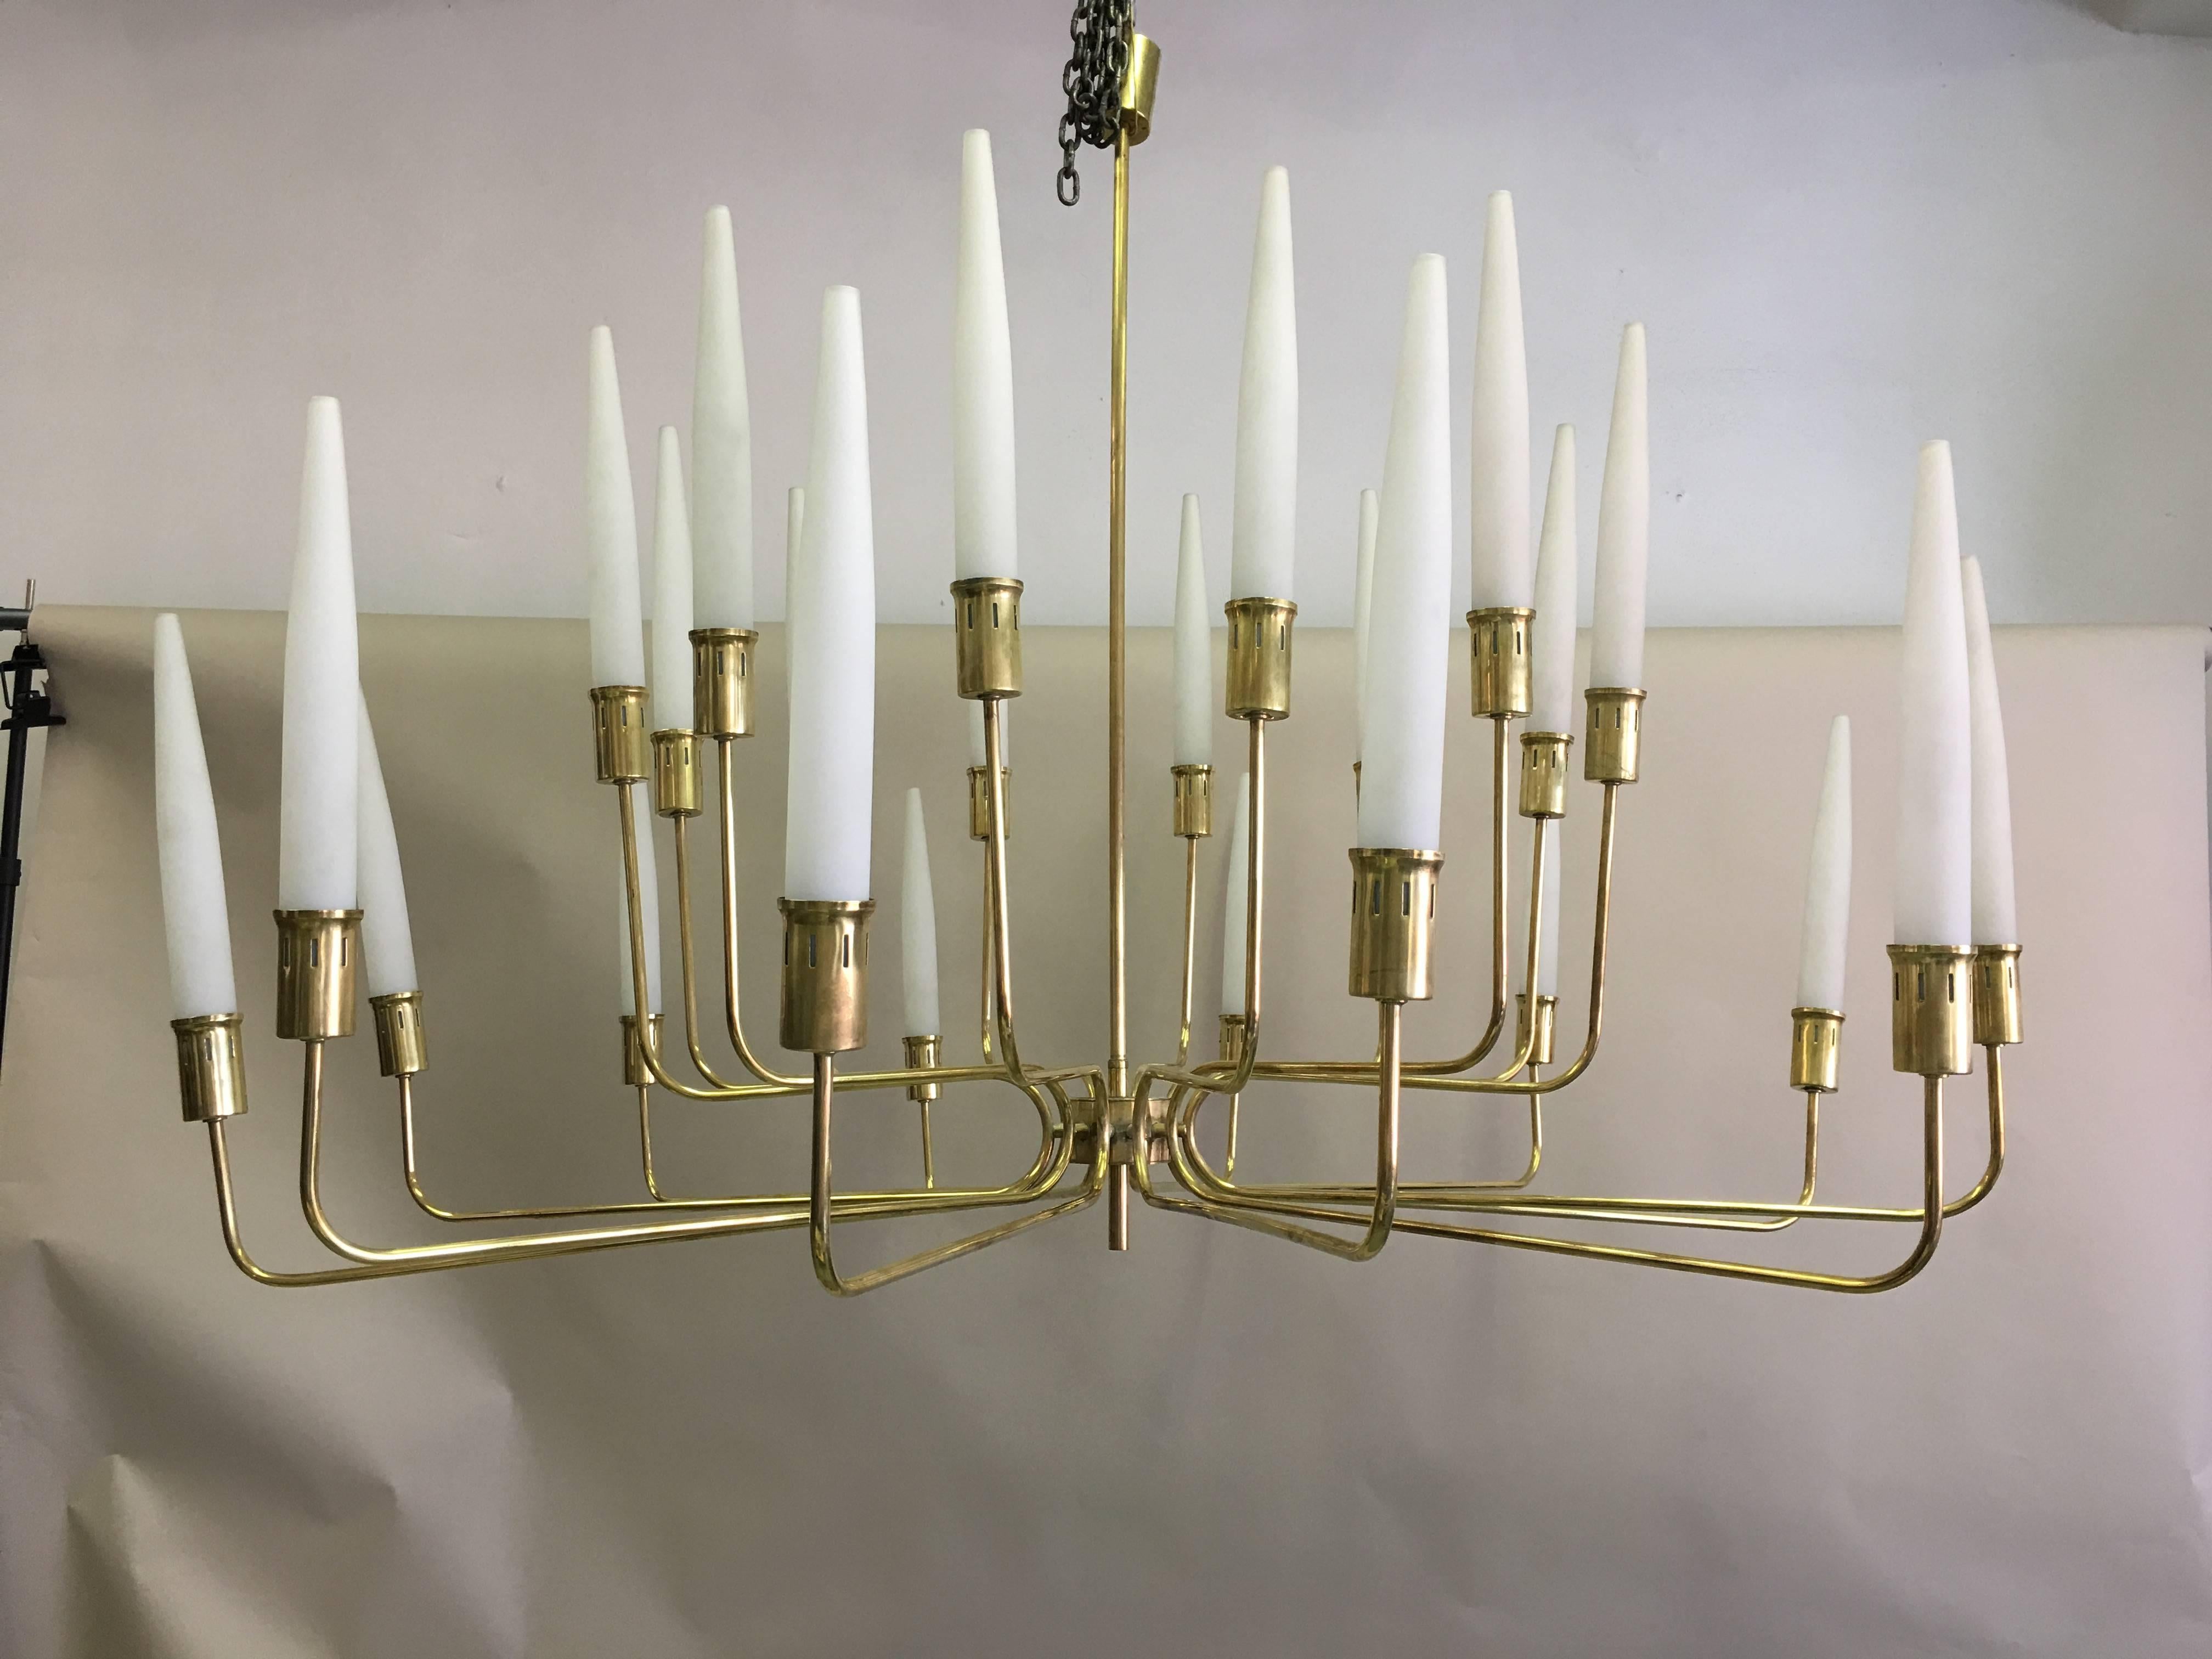 A rare and important, large, Italian Mid-Century Modern chandelier / pendant attributed to Fontana Arte circa 1958. The piece features sober, yet dramatic craftsmanship and design. This elegant light features a solid brass frame and 24 satin milk